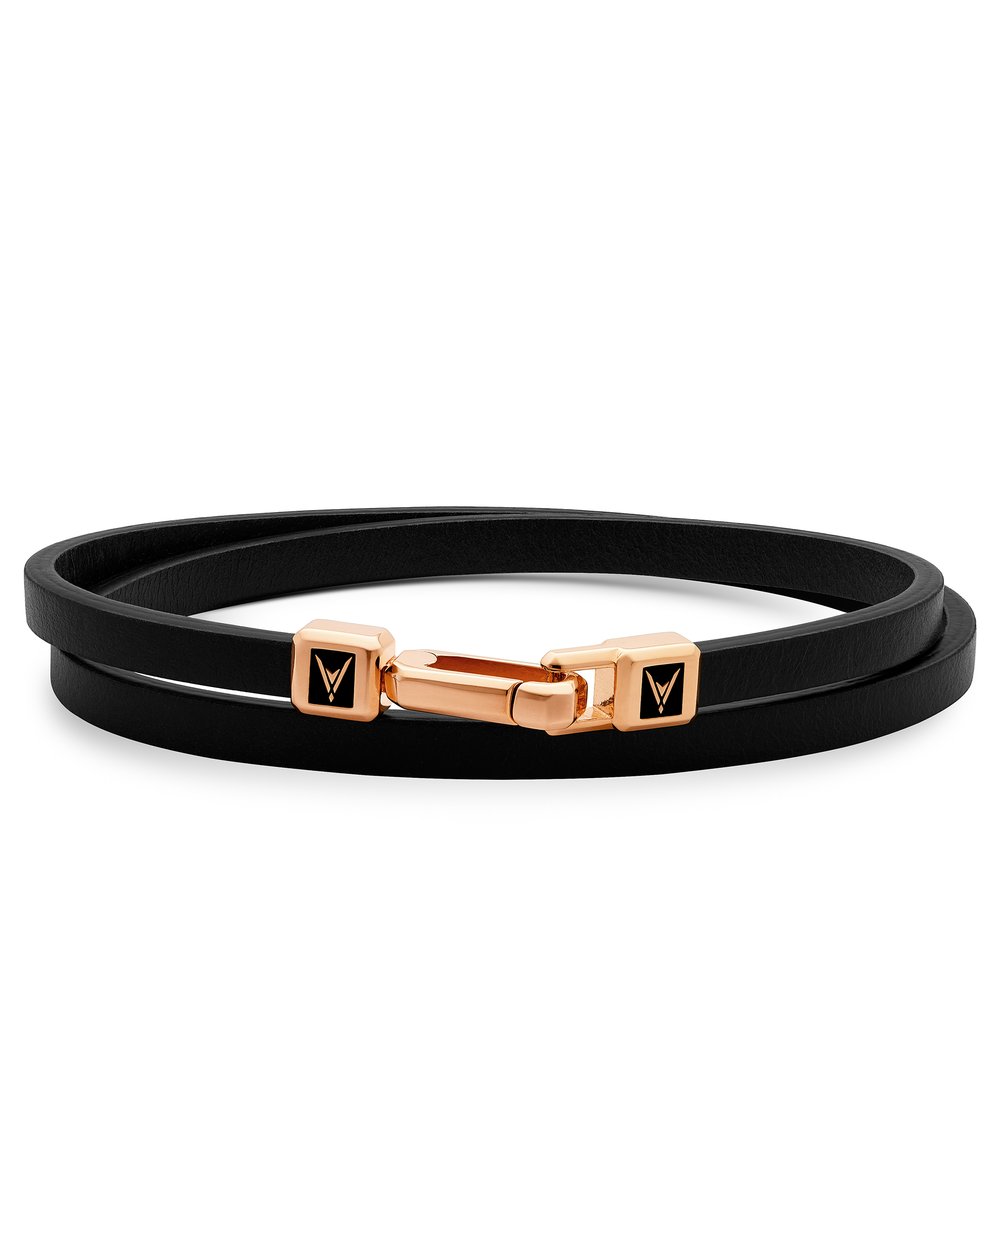 The Hitch - Black/Rose Gold